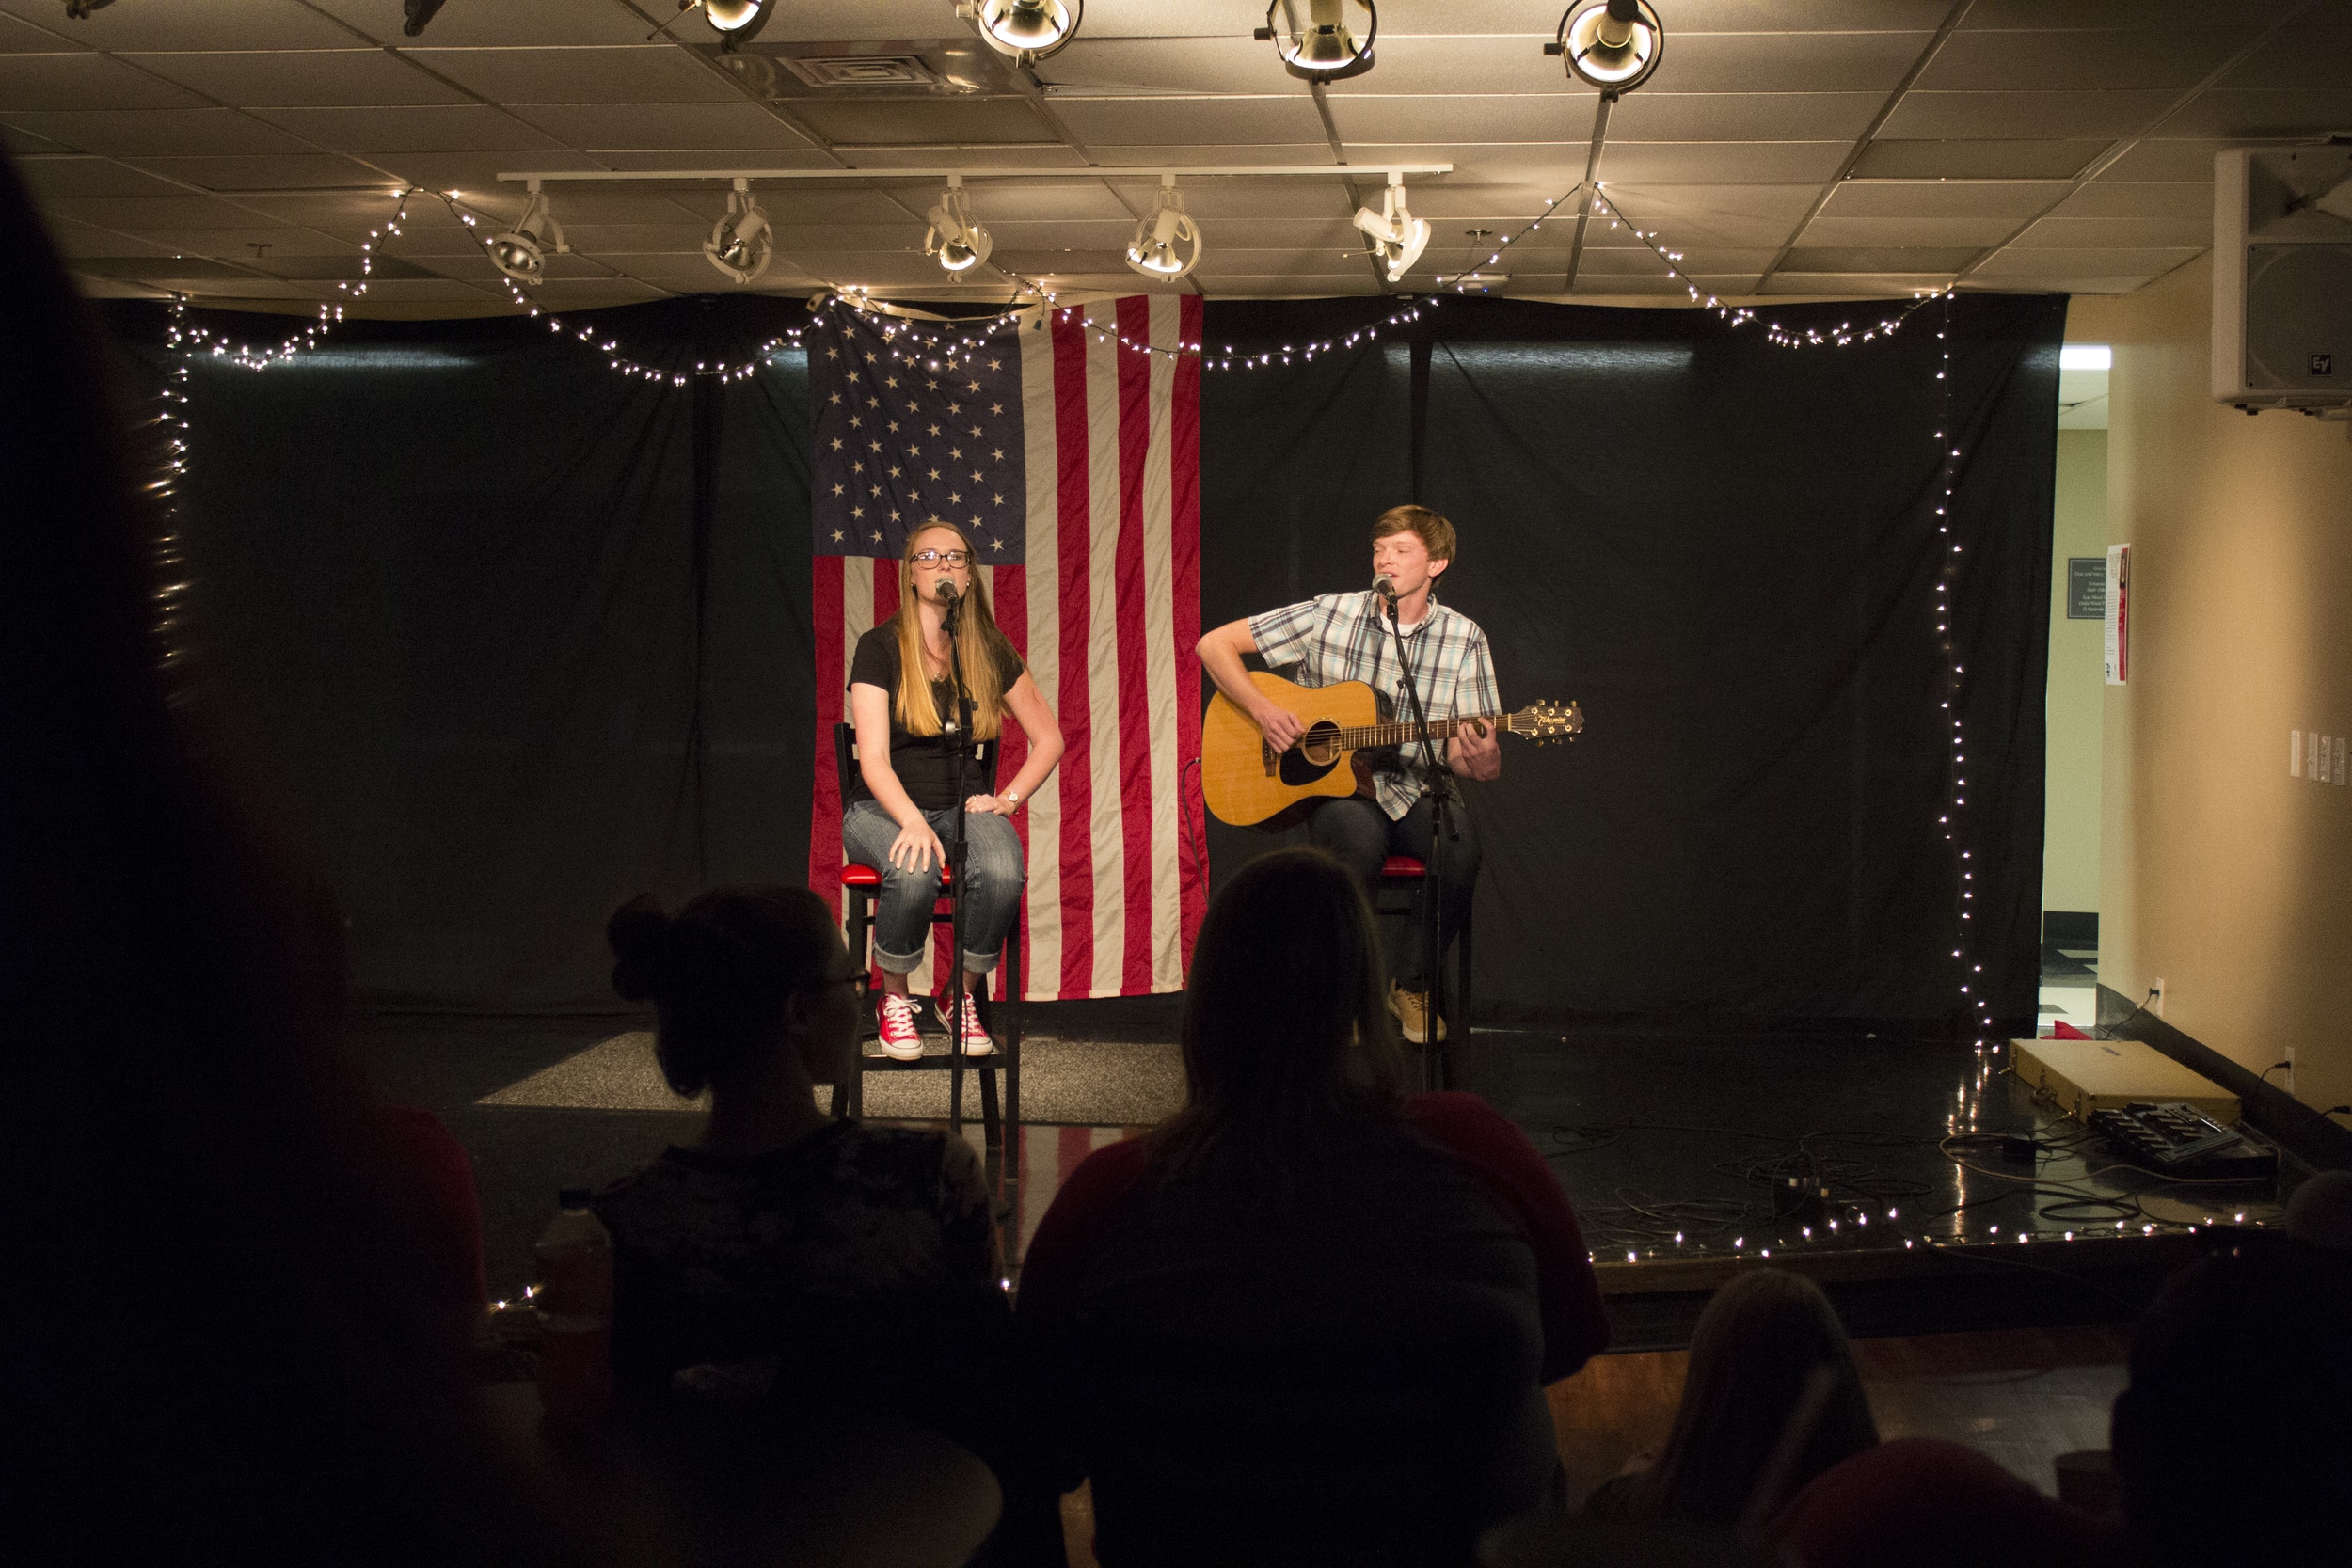  Siblings Hudson and Carole Anne Tankersley sing a duet of one of Ed Sheeran's songs from one of his first albums. Their rendition of "Lego House" brought many reminiscent smiles from the audience, who joined in singing.&nbsp; 